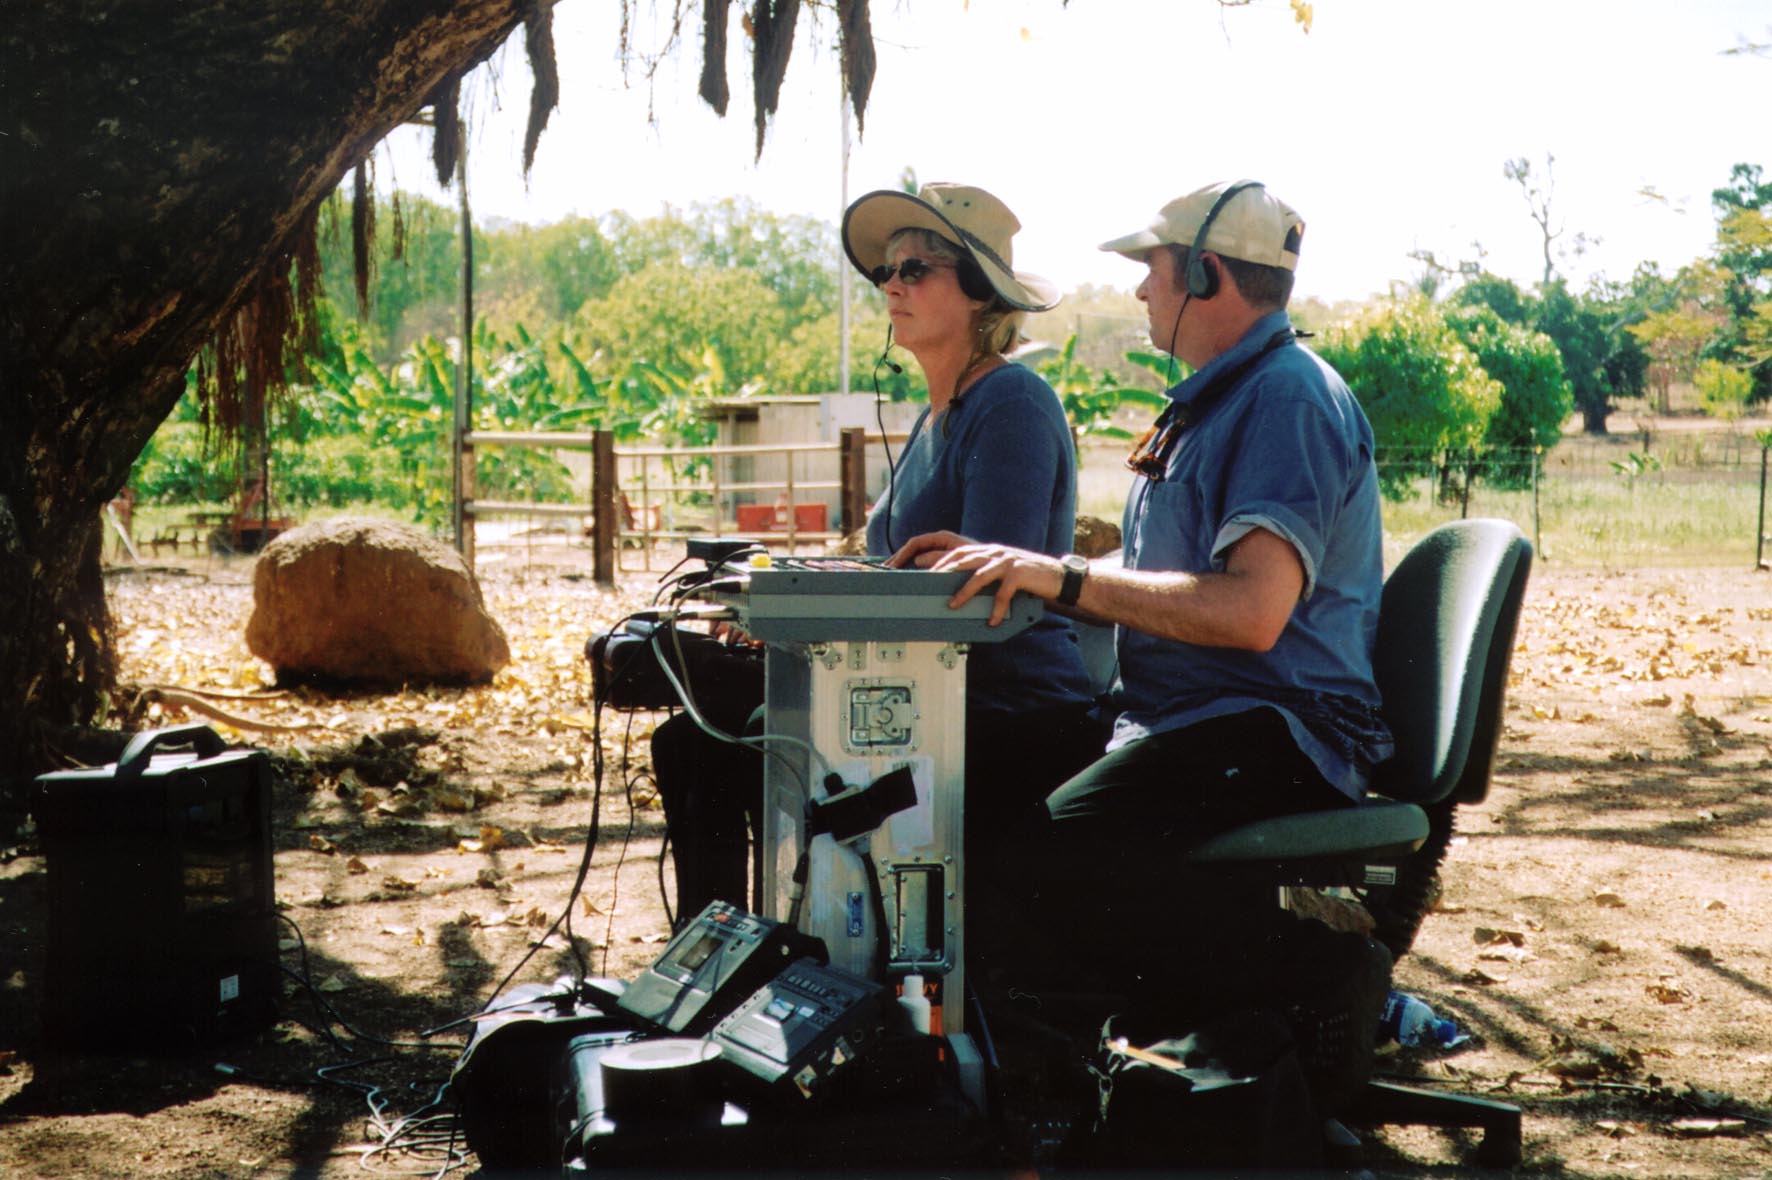 Hansard editor Deborah Rodgers and Parliamentary Broadcasting technician Peter Treloar assisting the committee with proceedings at Goulburn Island, NT, 11 September 2002.